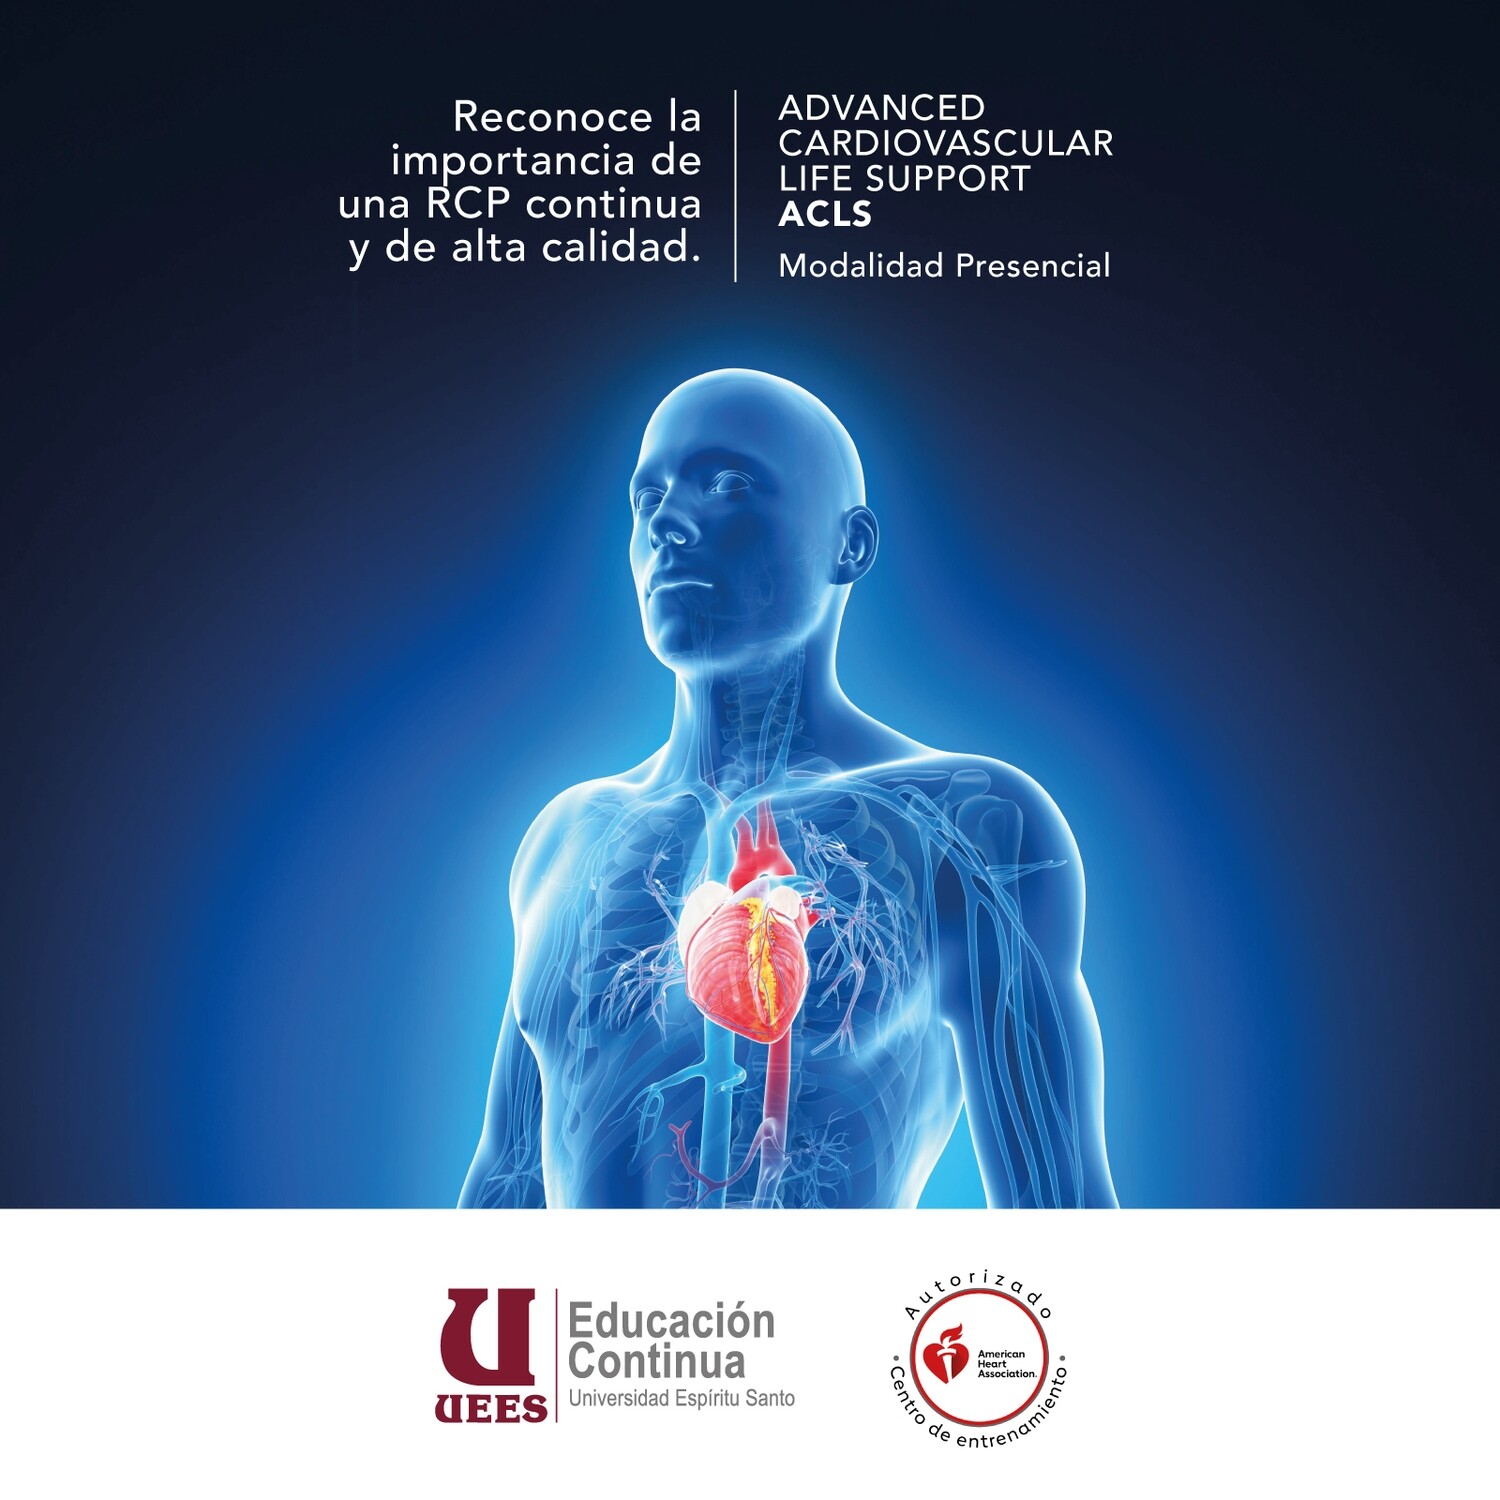 ADVANCED CARDIOVASCULAR LIFE SUPPORT ACLS